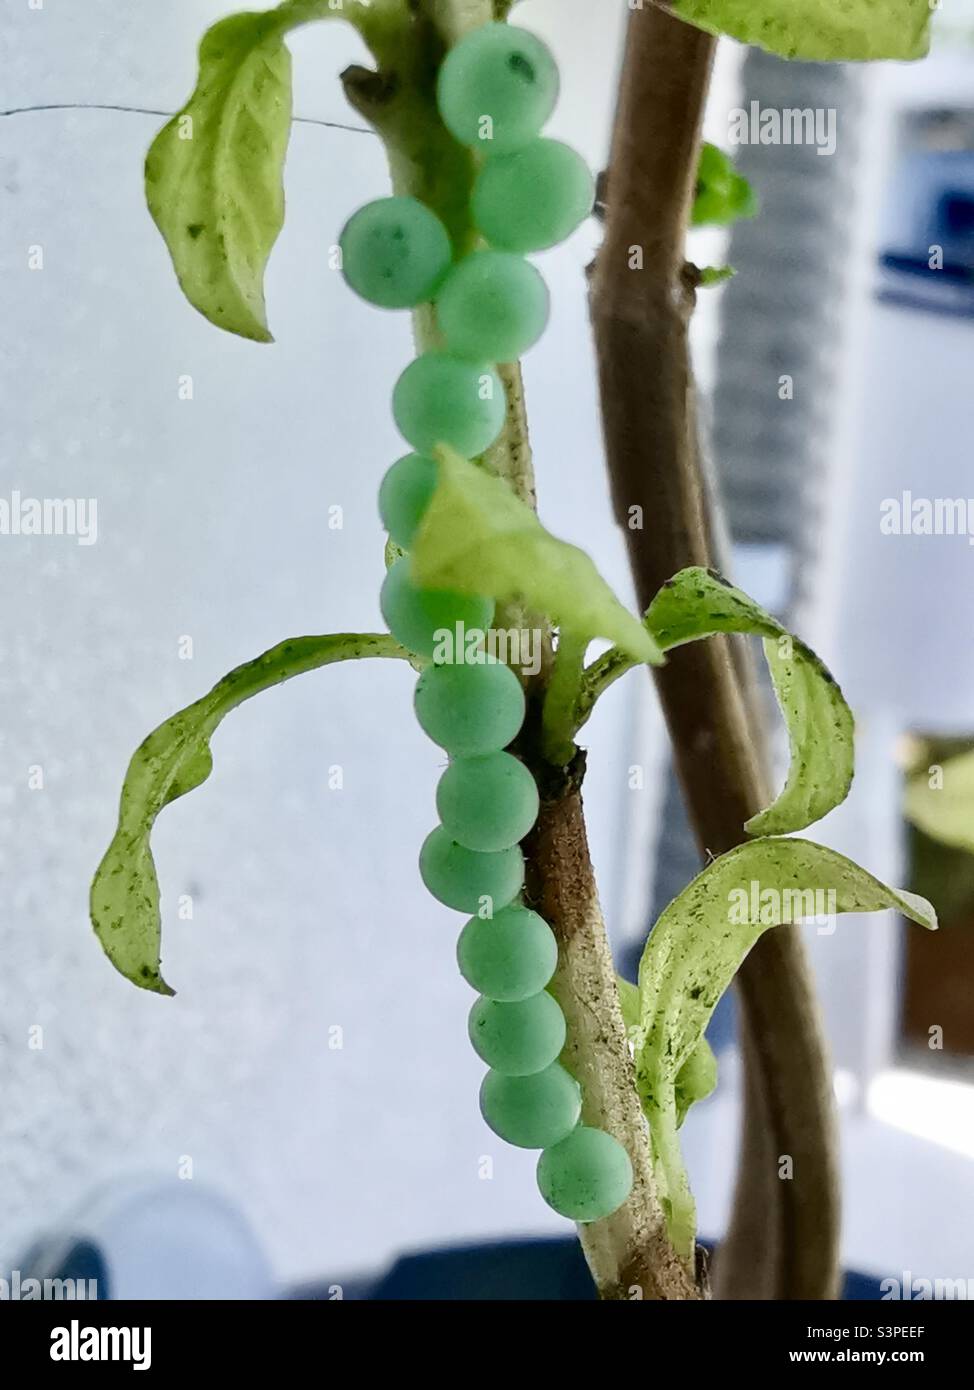 A closeup shot of green insect eggs. Stock Photo